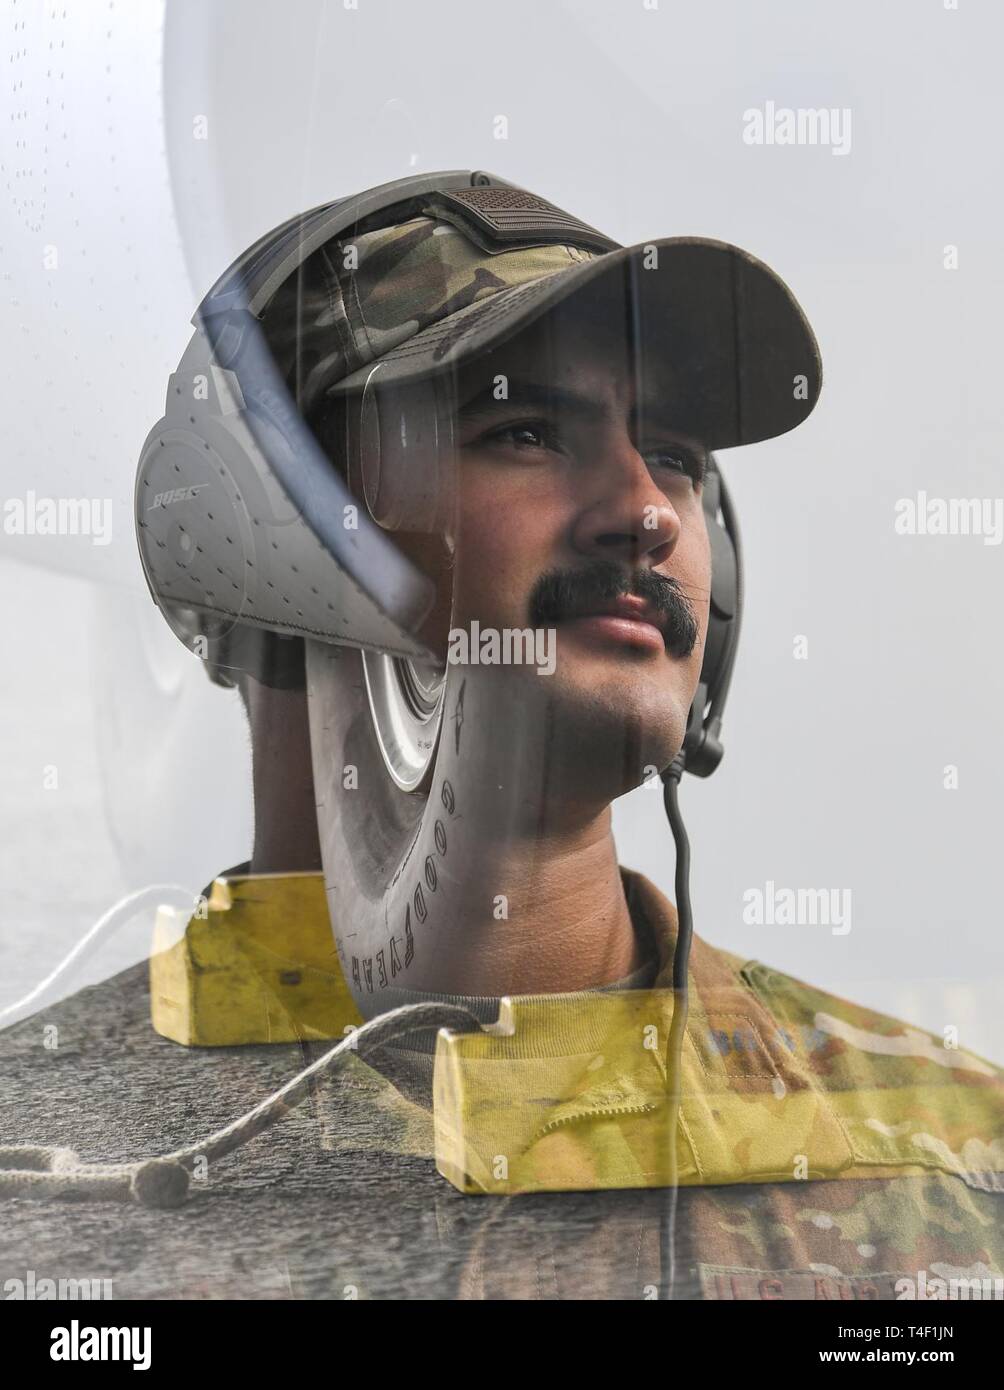 U.S. Air Force Senior Airman Brian Goodes, an aircraft maintainer assigned to the 75th Expeditionary Airlift Squadron, Combined Joint Task Force-Horn of Africa (CJTF-HOA), stands for an in-camera double exposure portrait at Maputo International Airport, Mozambique, April 7, 2019, for the U.S. Department of Defense’s relief effort in the Republic of Mozambique and surrounding areas following Cyclone Idai. Teams from CJTF-HOA, which is leading DoD support to relief efforts in Mozambique, began immediate preparation to respond following a call for assistance from the U.S. Agency for International Stock Photo